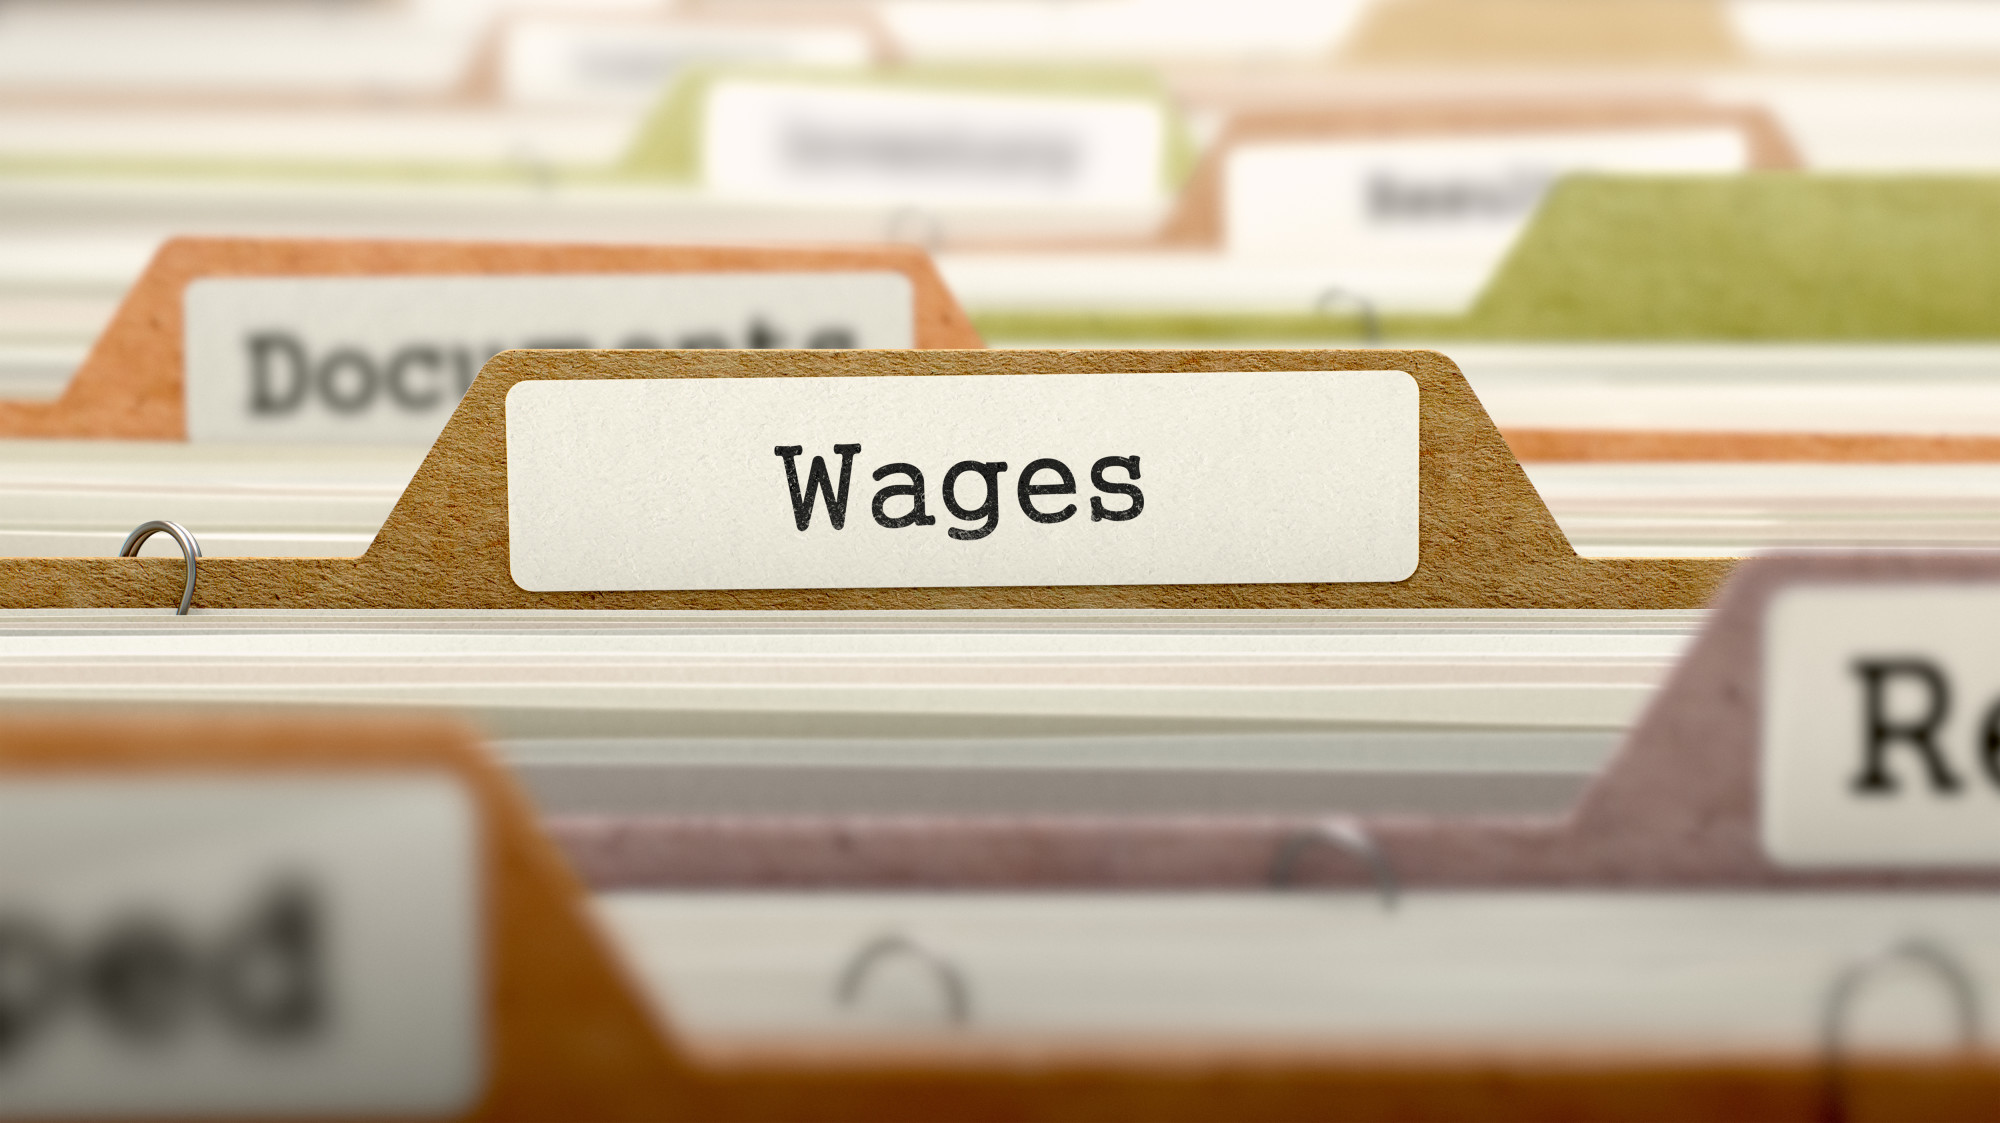 wages and other folders